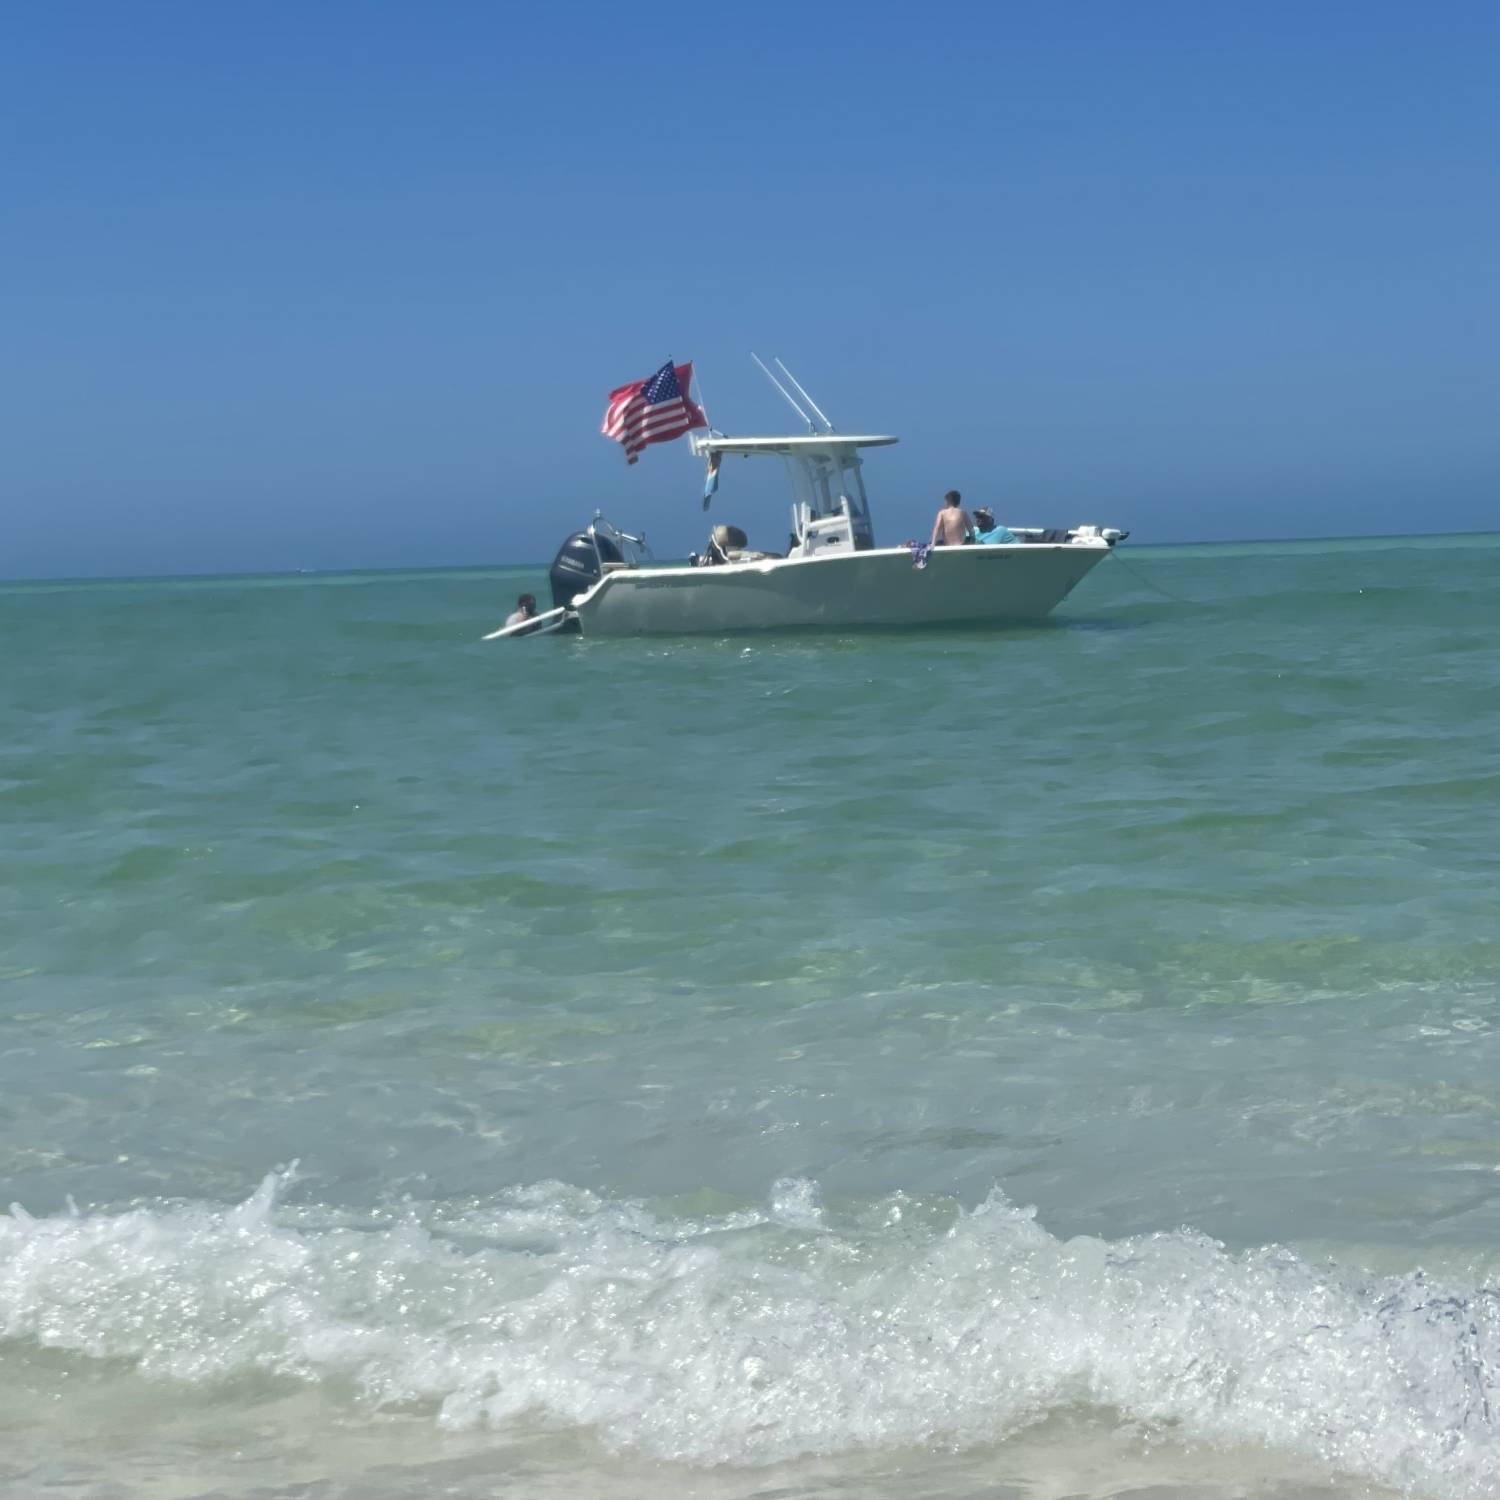 Title: Island life - On board their Sportsman Open 212 Center Console - Location: Anna Maria Island Florida. Participating in the Photo Contest #SportsmanMay